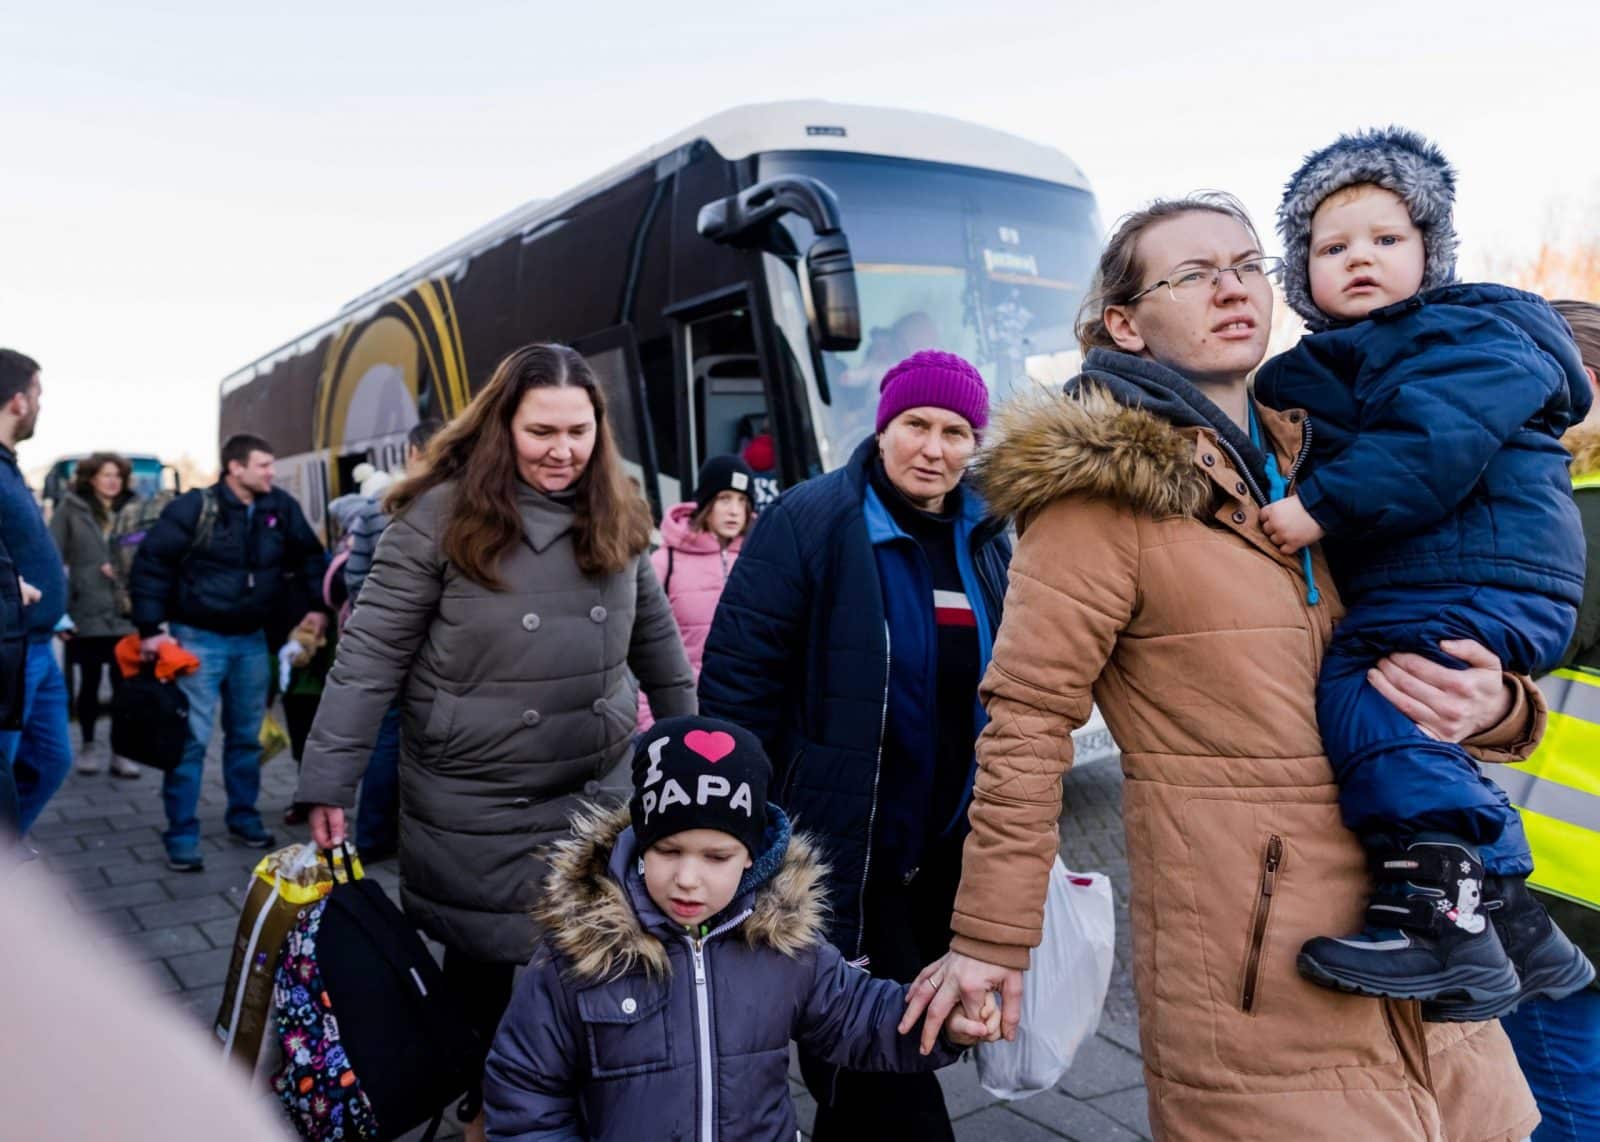 Great Britain will donate 10 million pounds to Ukrainian refugees